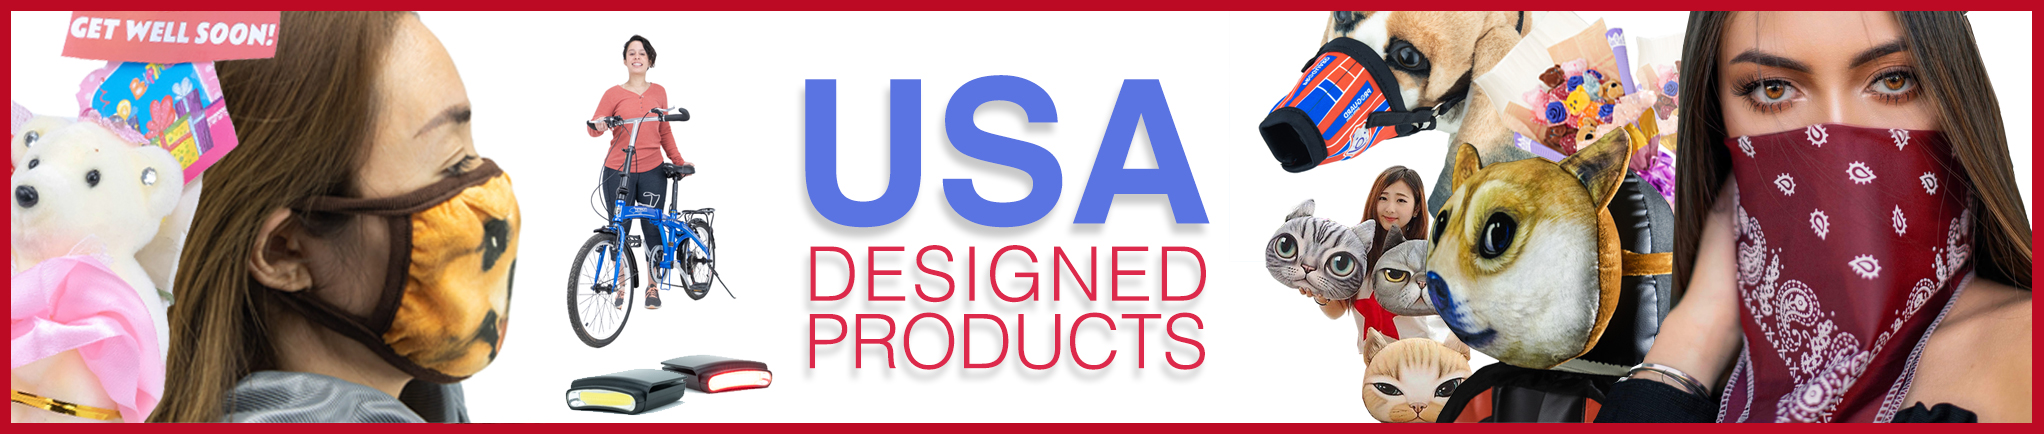 USA Designed Products is a supplier of Bandanas, Face Masks and More